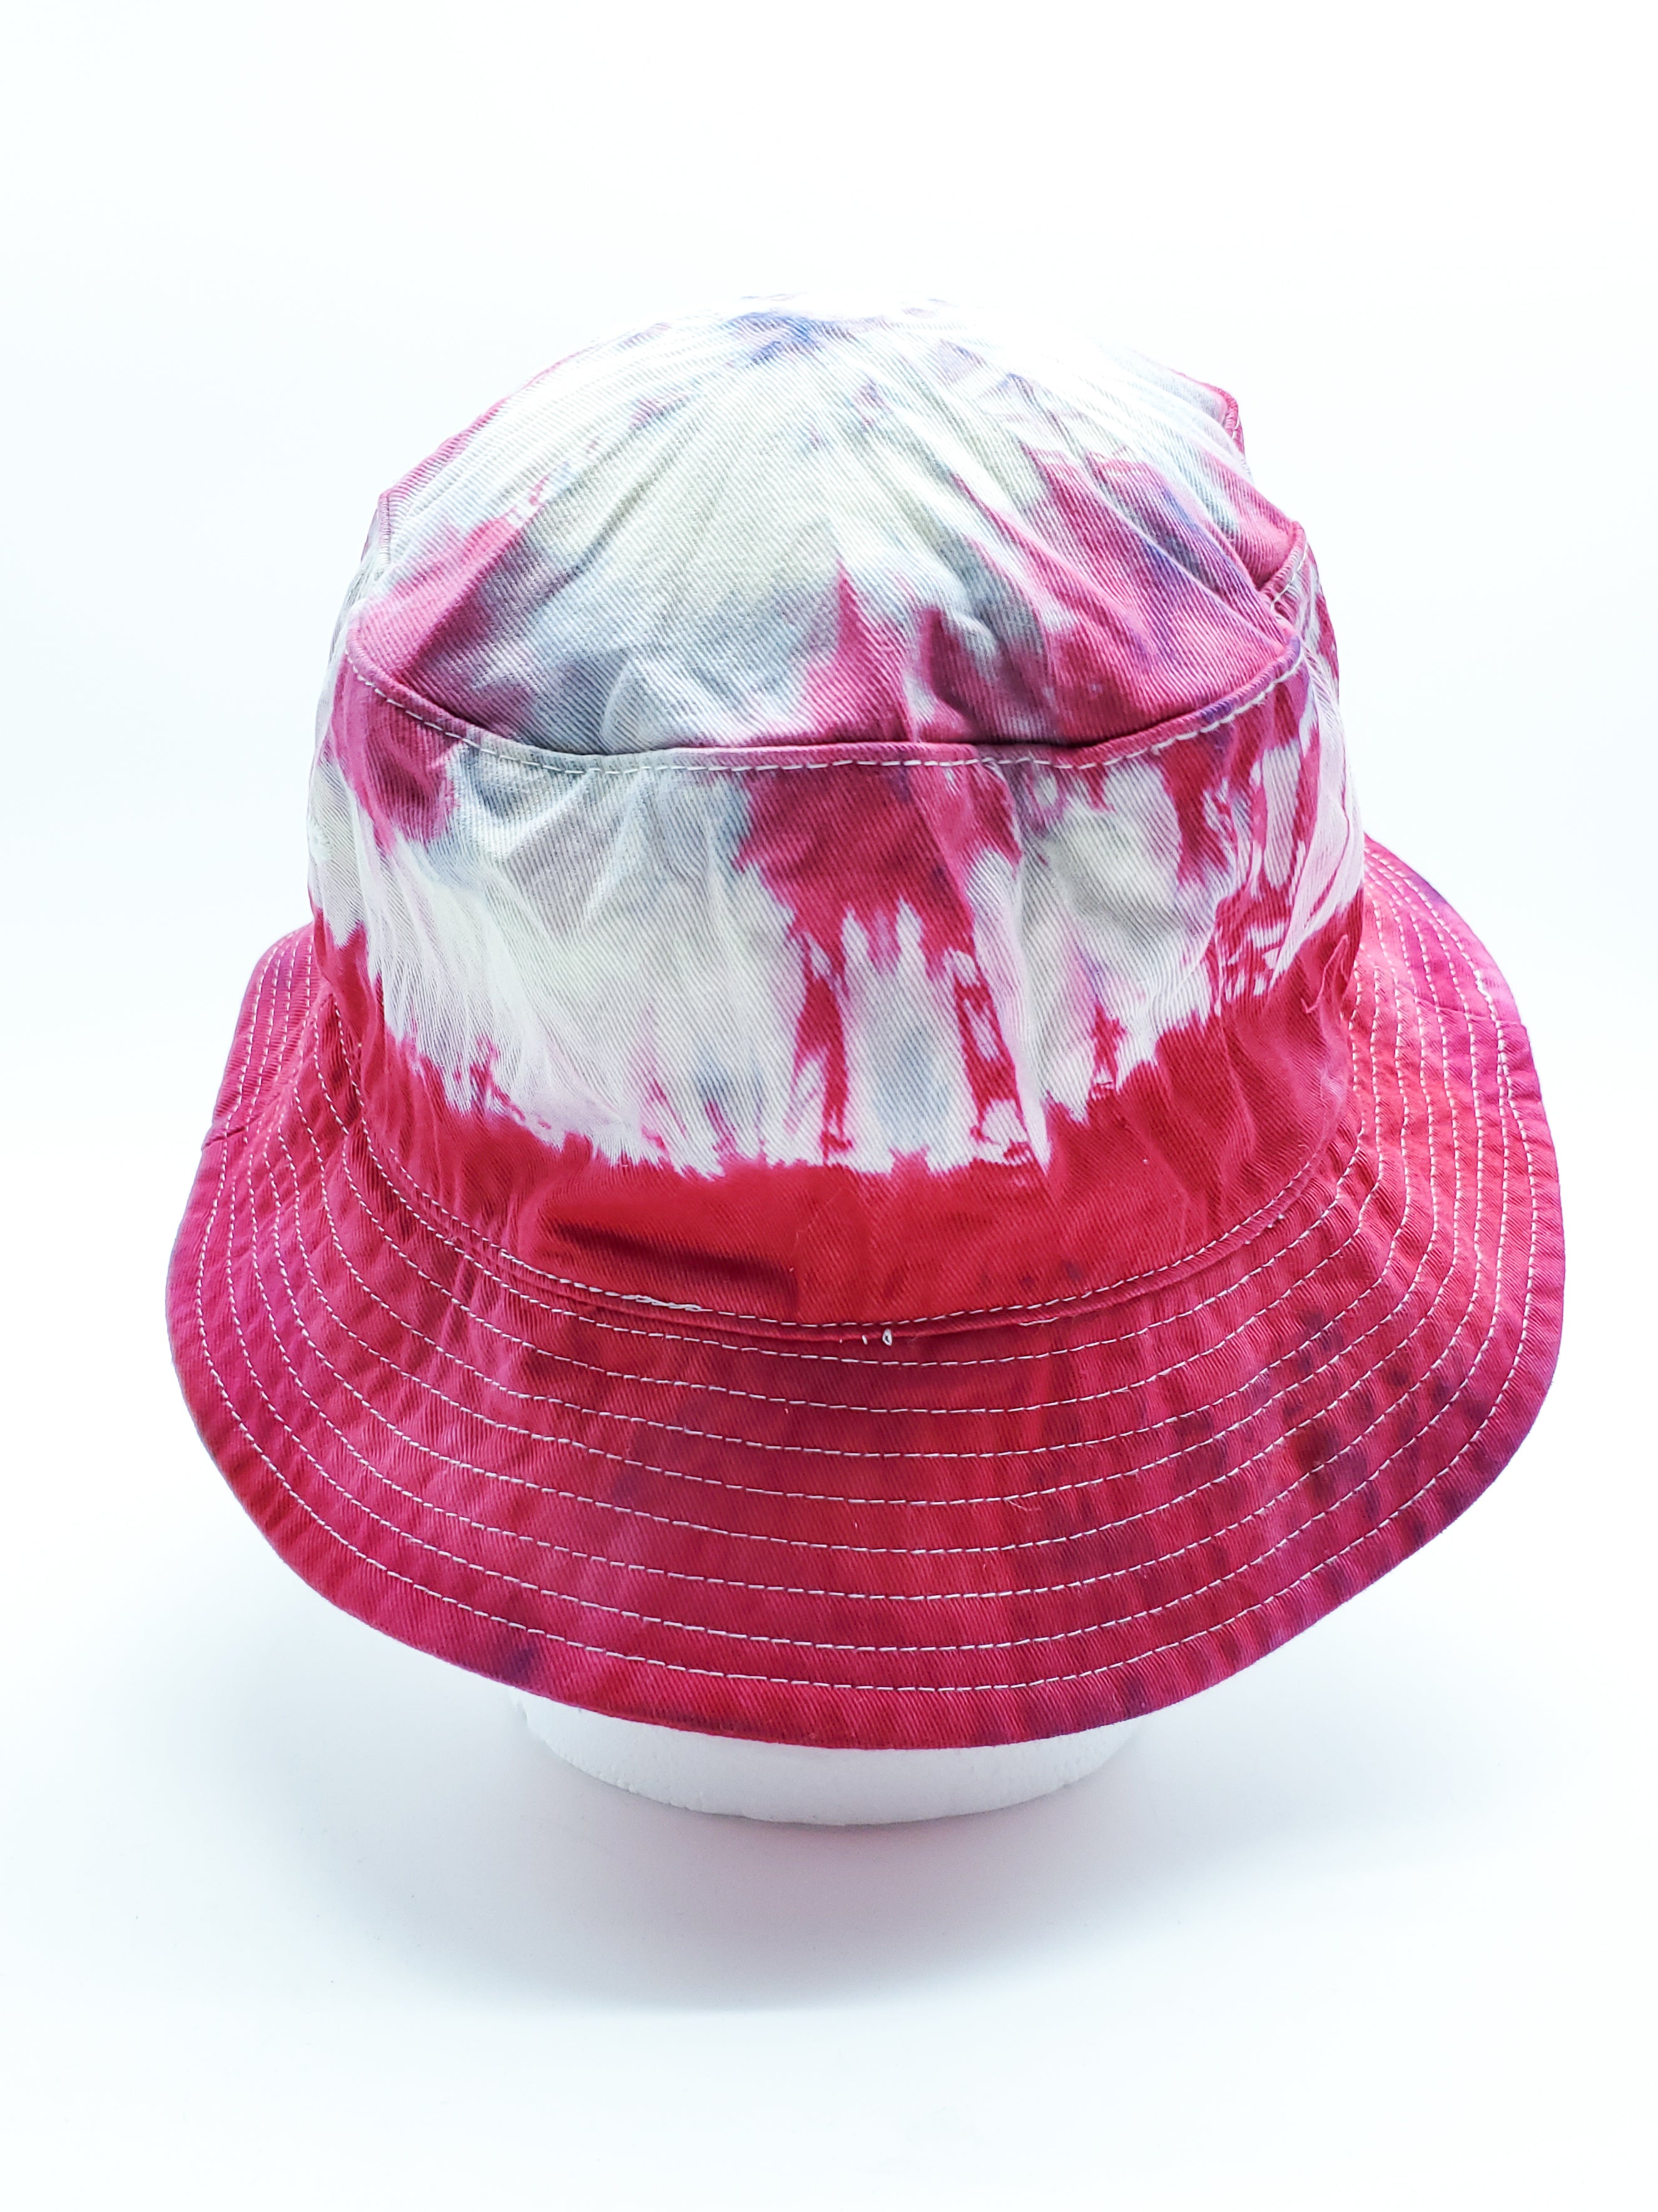 Hot Hibiscus Tie Dyed Bucket Hat (Adult, O/S) - The Caffeinated Raven